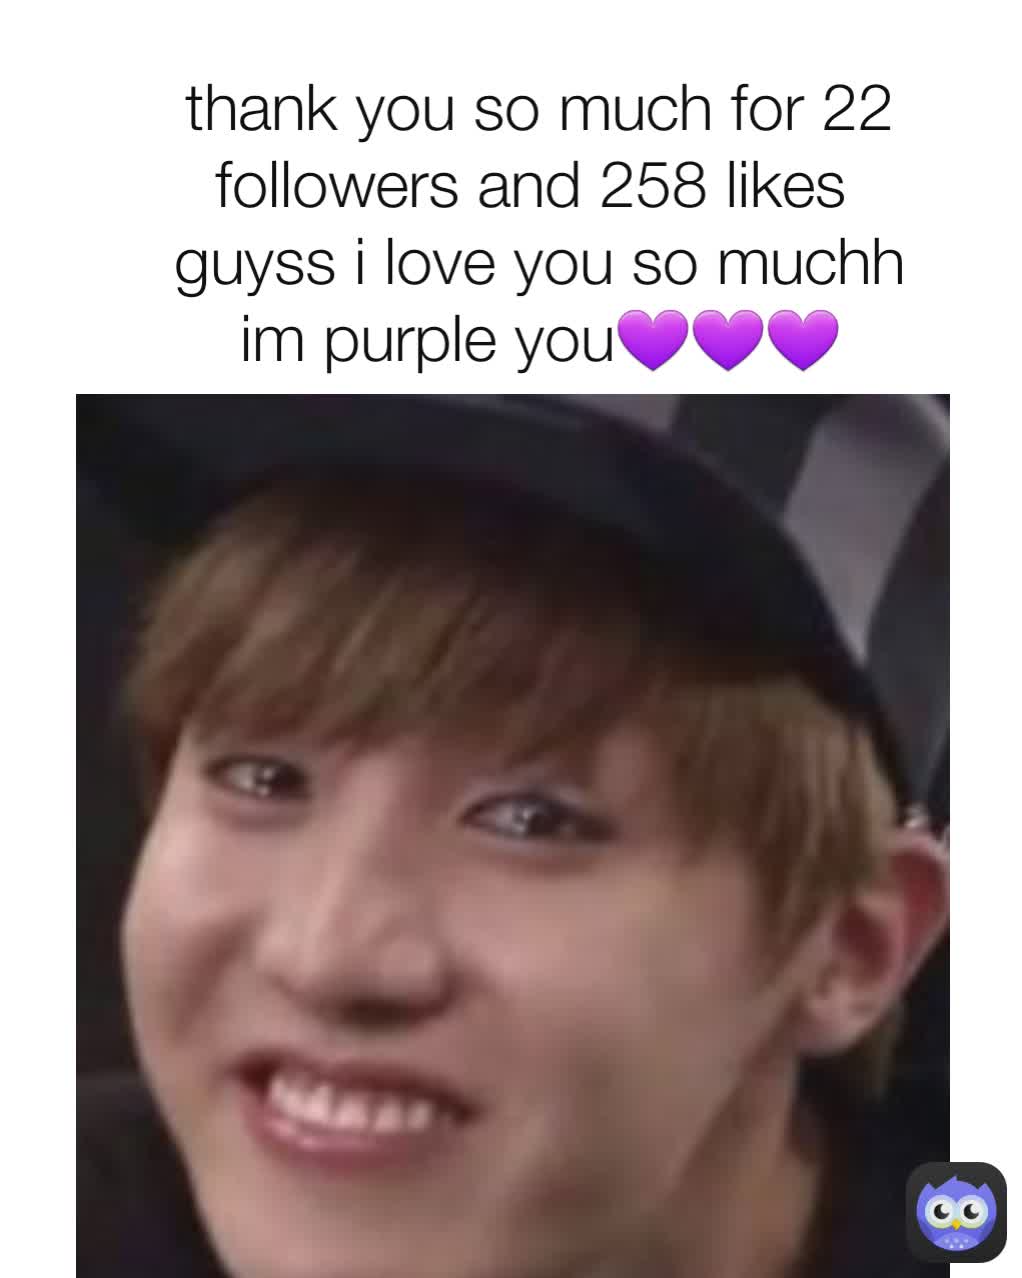 thank you so much for 22 followers and 258 likes 
guyss i love you so muchh
im purple you💜💜💜